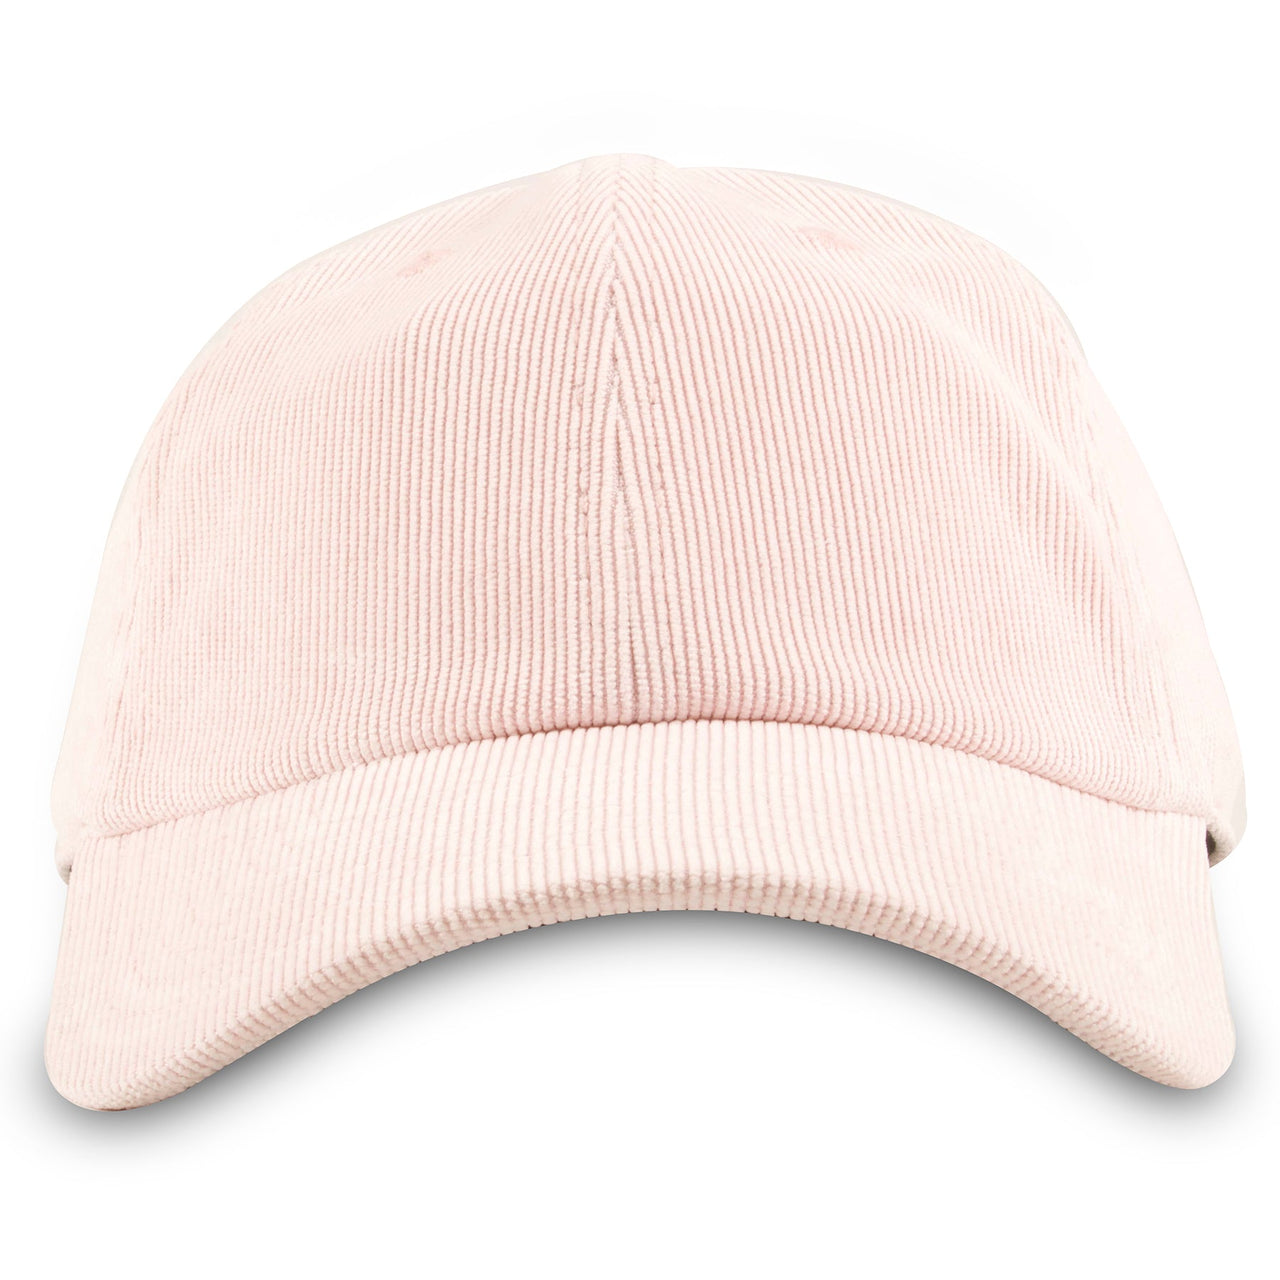 The light pink blank corduroy baseball cap is solid pink with a soft unstructured crown